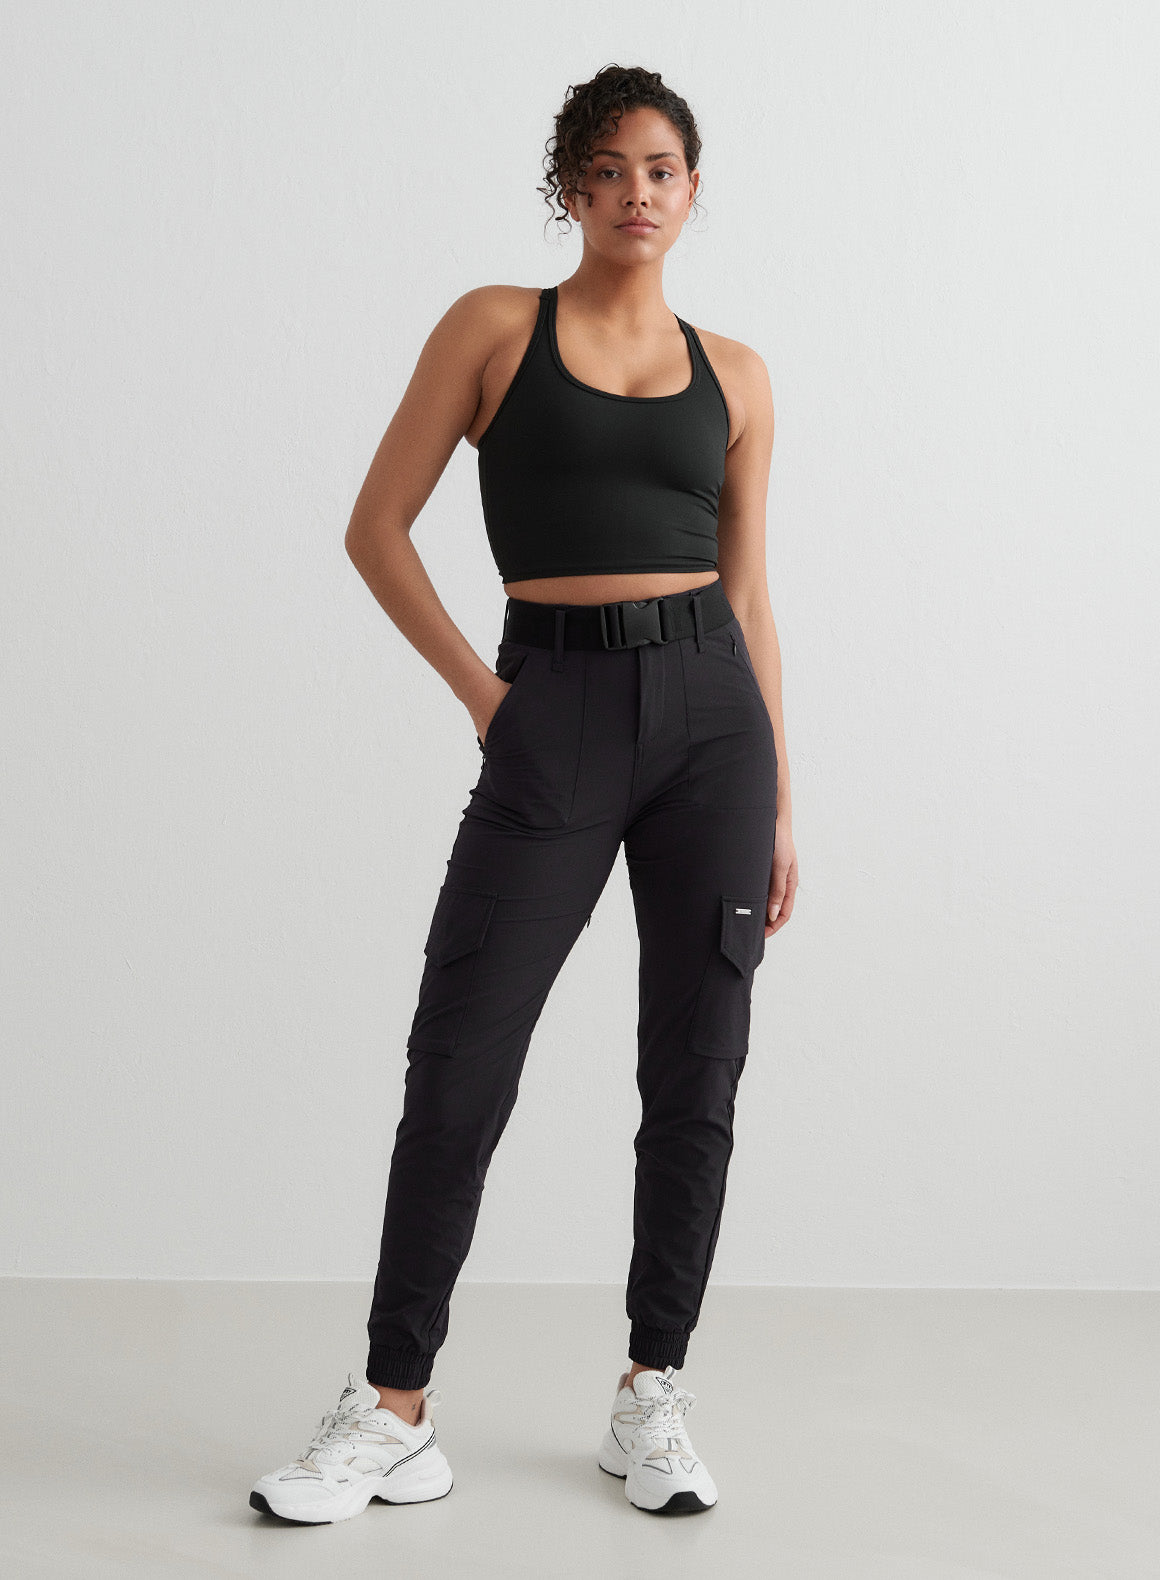 Active Wear - Yoga Pants - Cargo - All Things Blessed